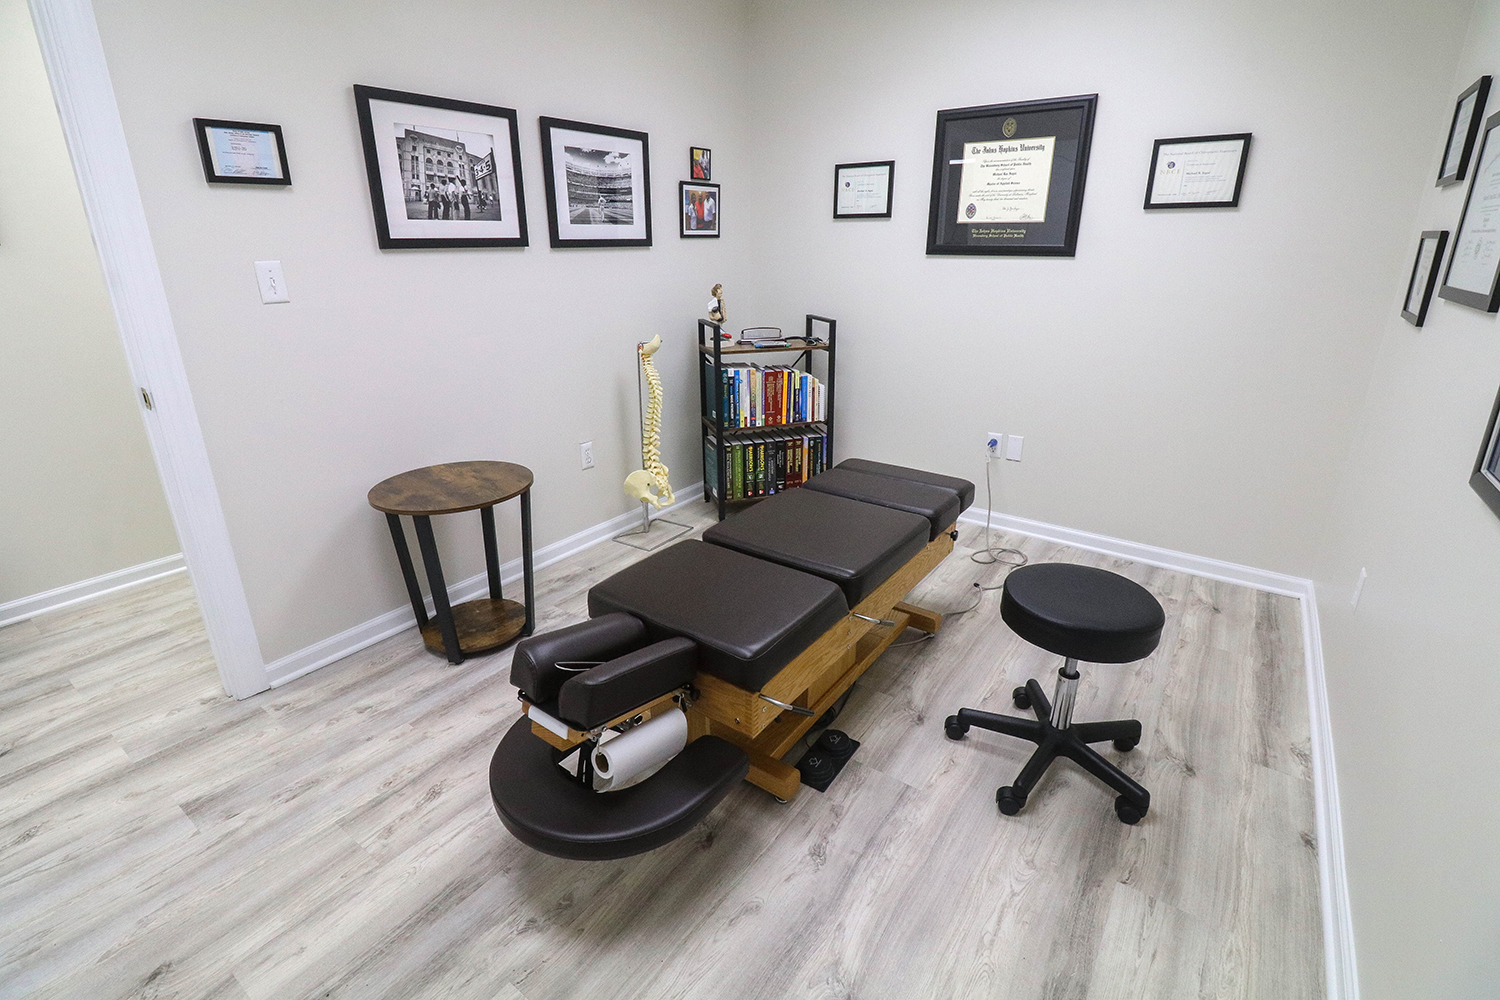 Performance Health Sports Care + Recovery: Chiropractic and Physical Rehabilitation